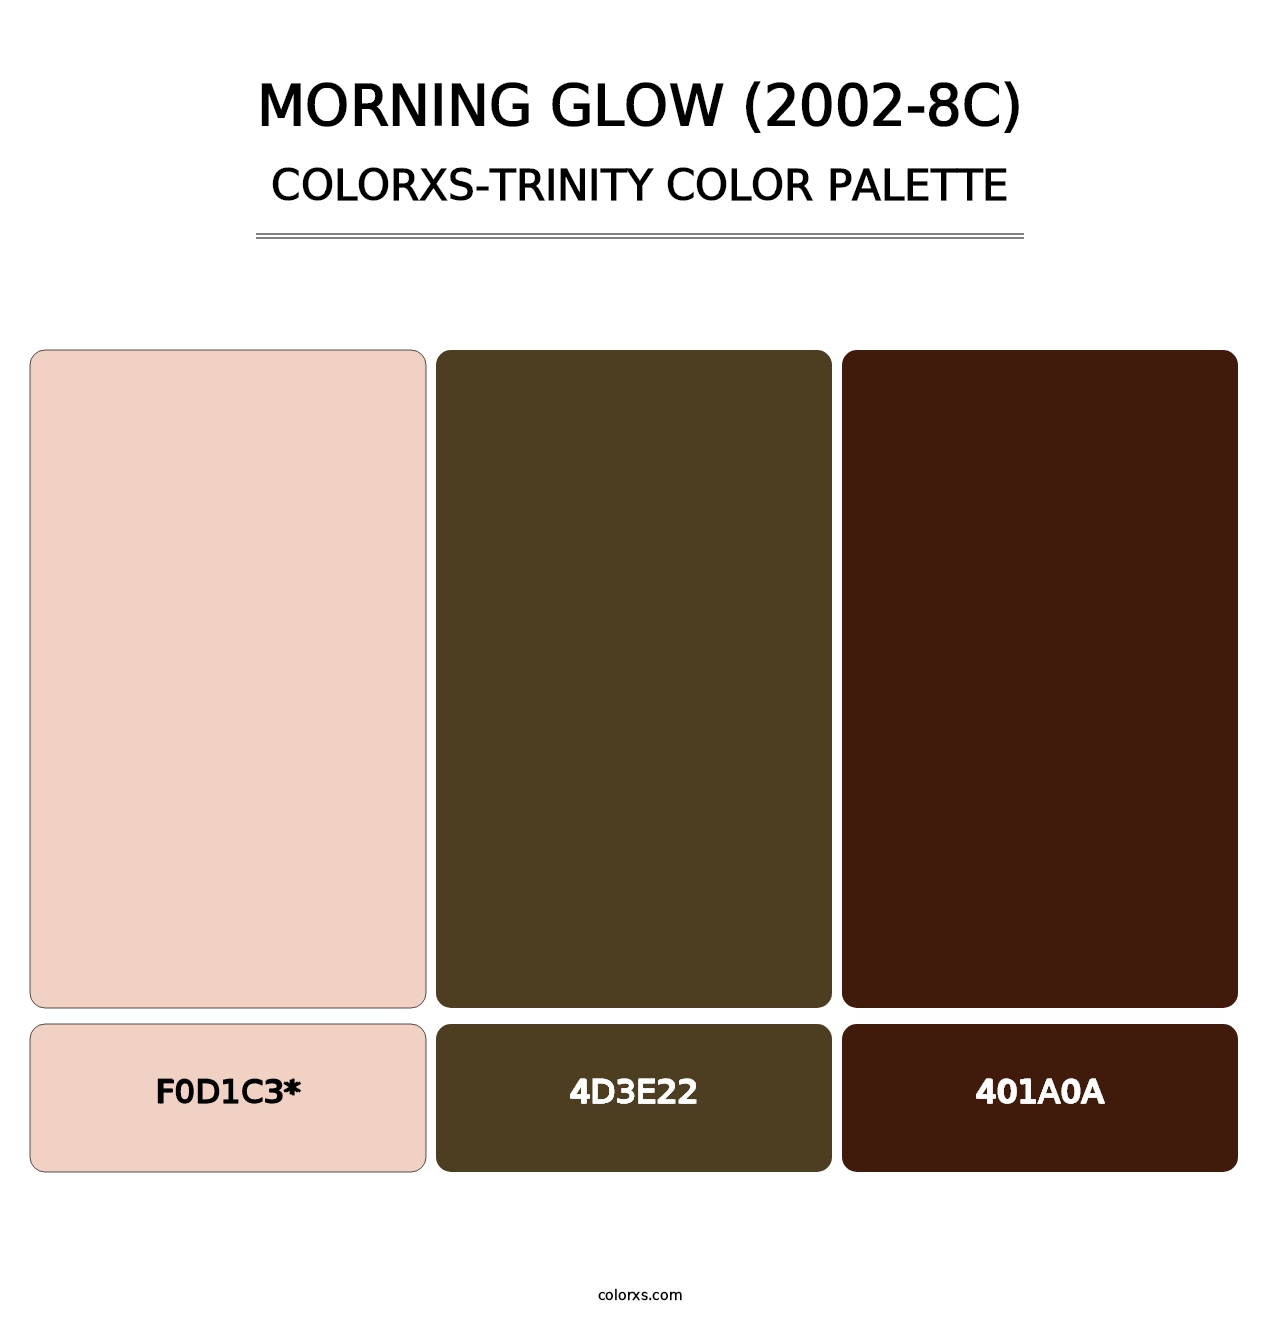 Morning Glow (2002-8C) - Colorxs Trinity Palette